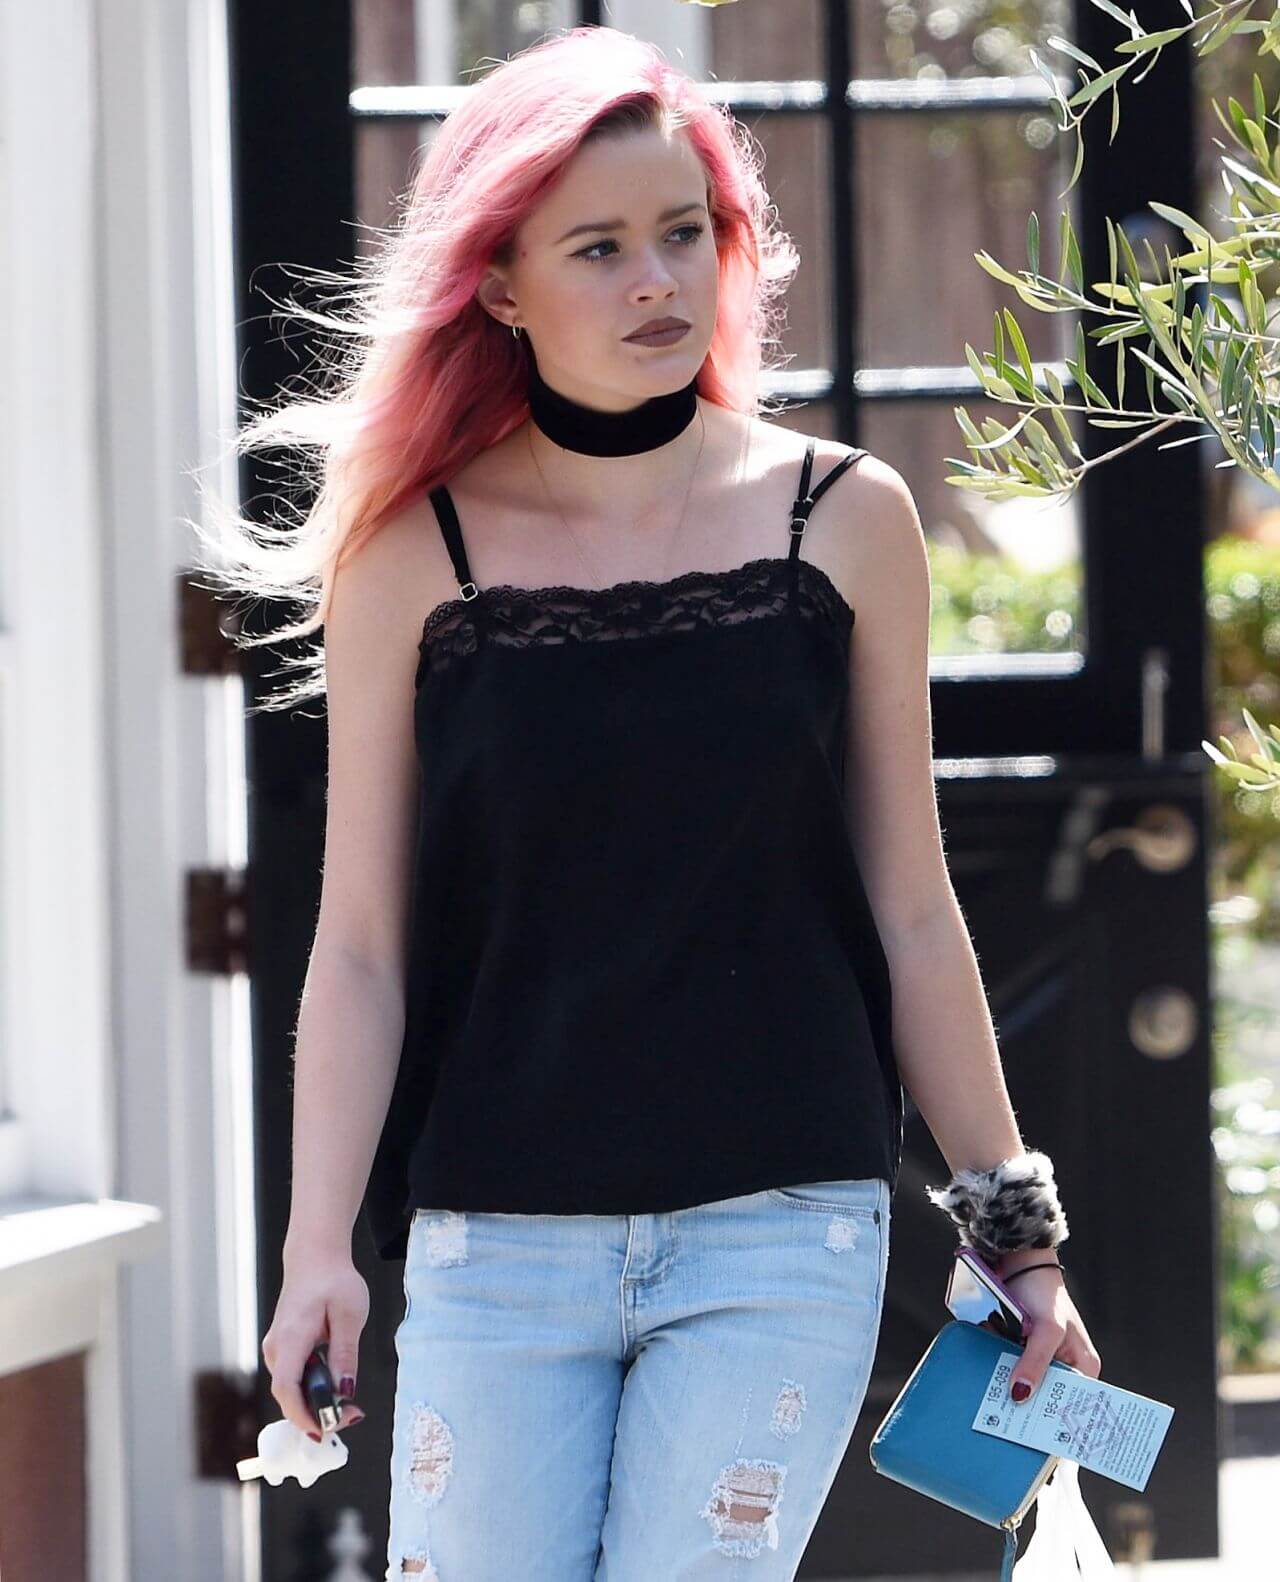 Ava Elizabeth Phillippe In Black Strap Sleeves Top With Blue Ripped Denim Jeans